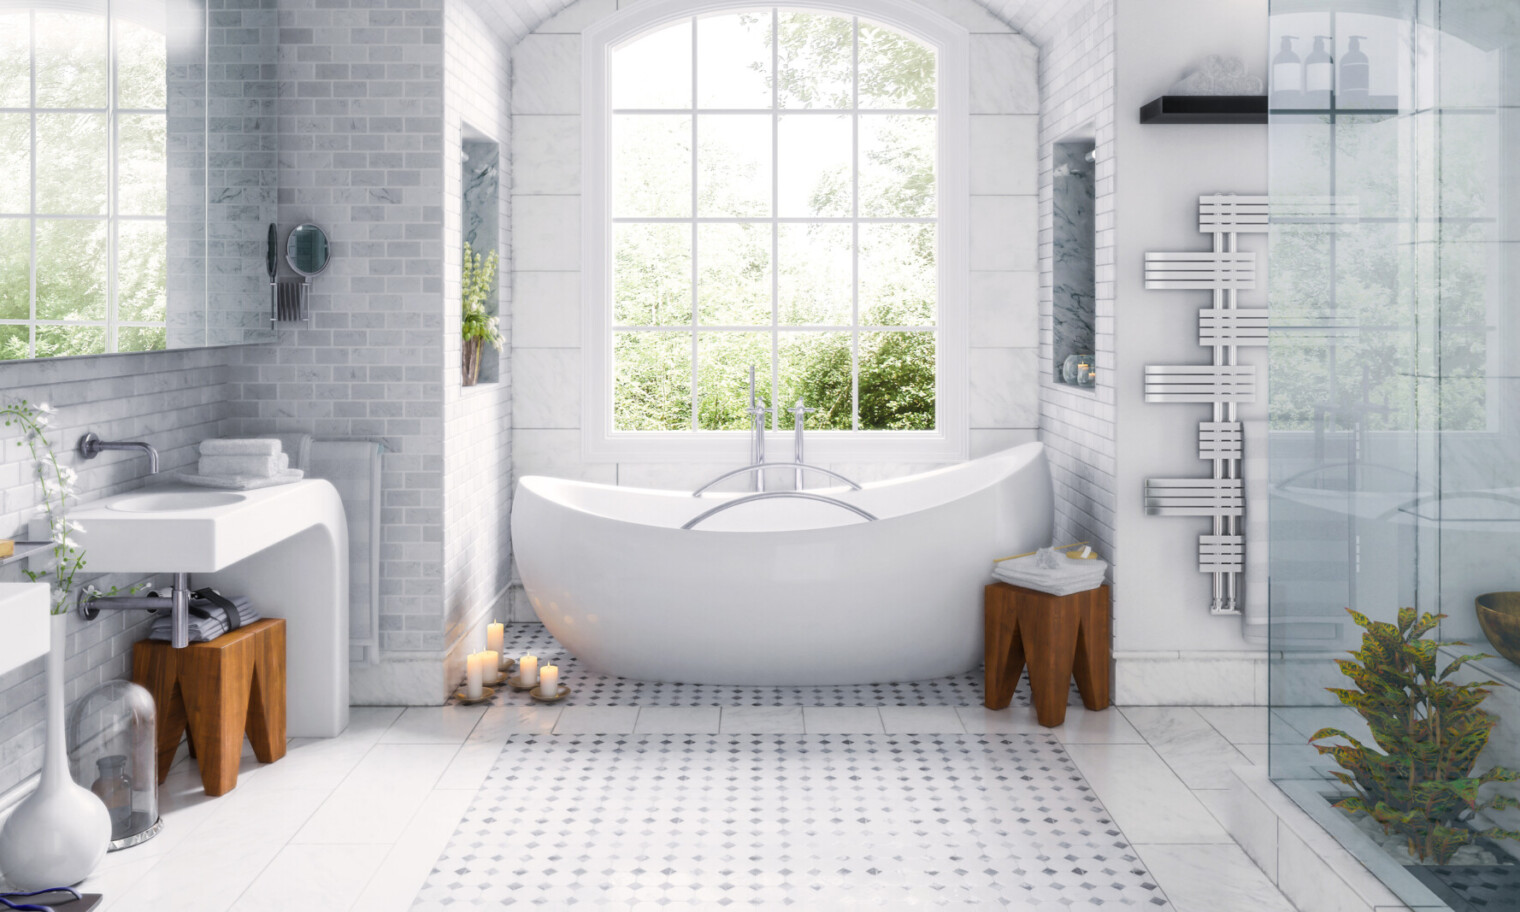 The 10 Best Bathroom Remodeling Trends - Décor Aid